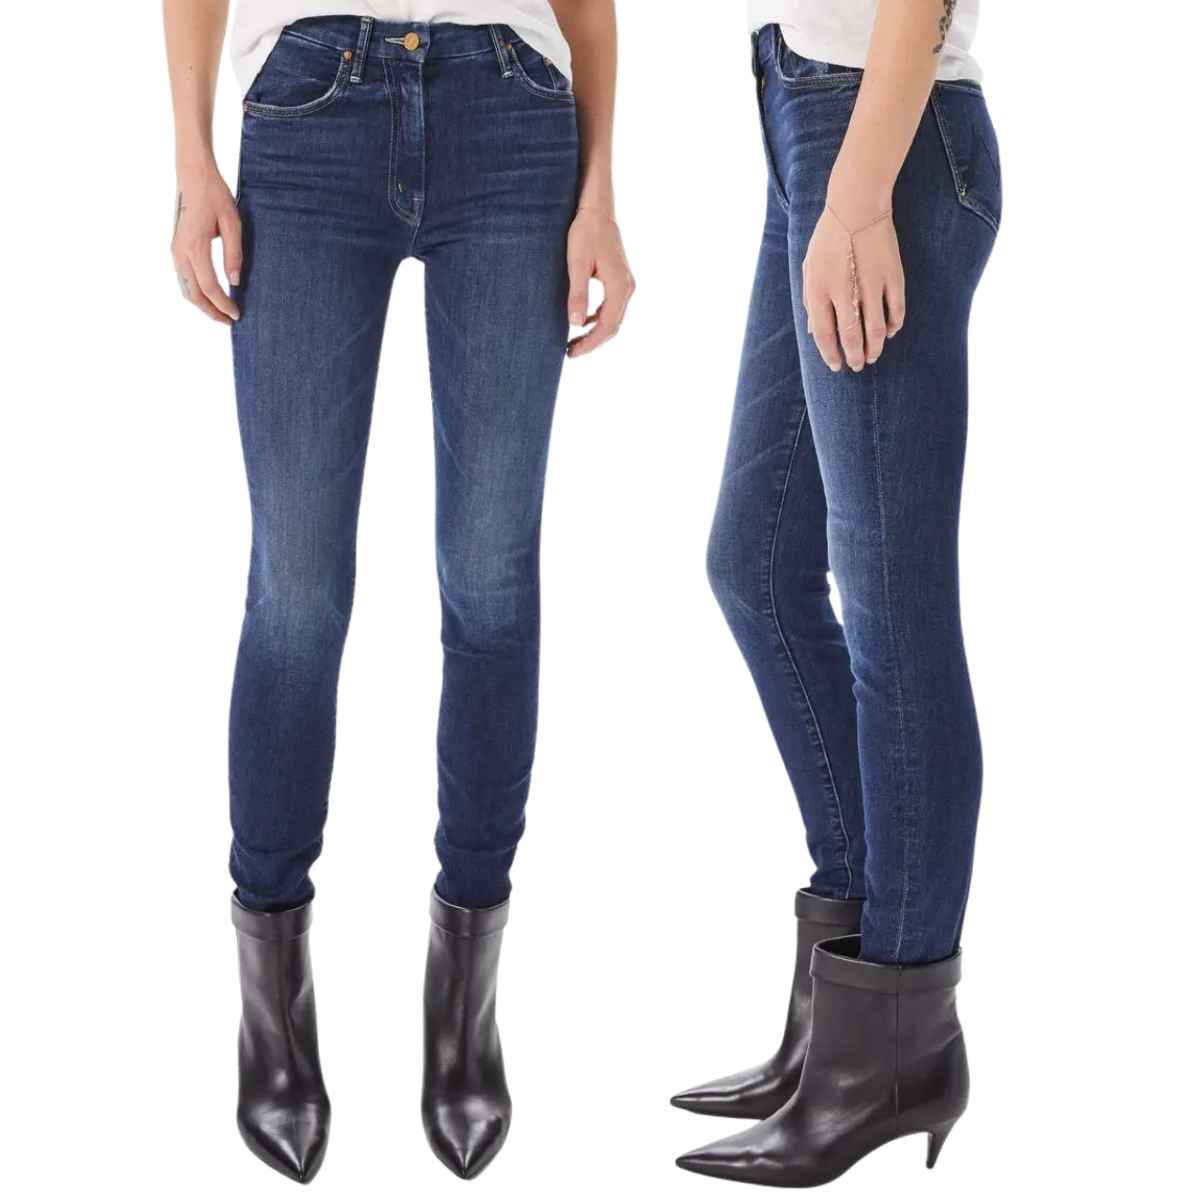 Front and side cropped view of woman's legs wearing dark wash skinny jeans tucked into wide boots on white background.